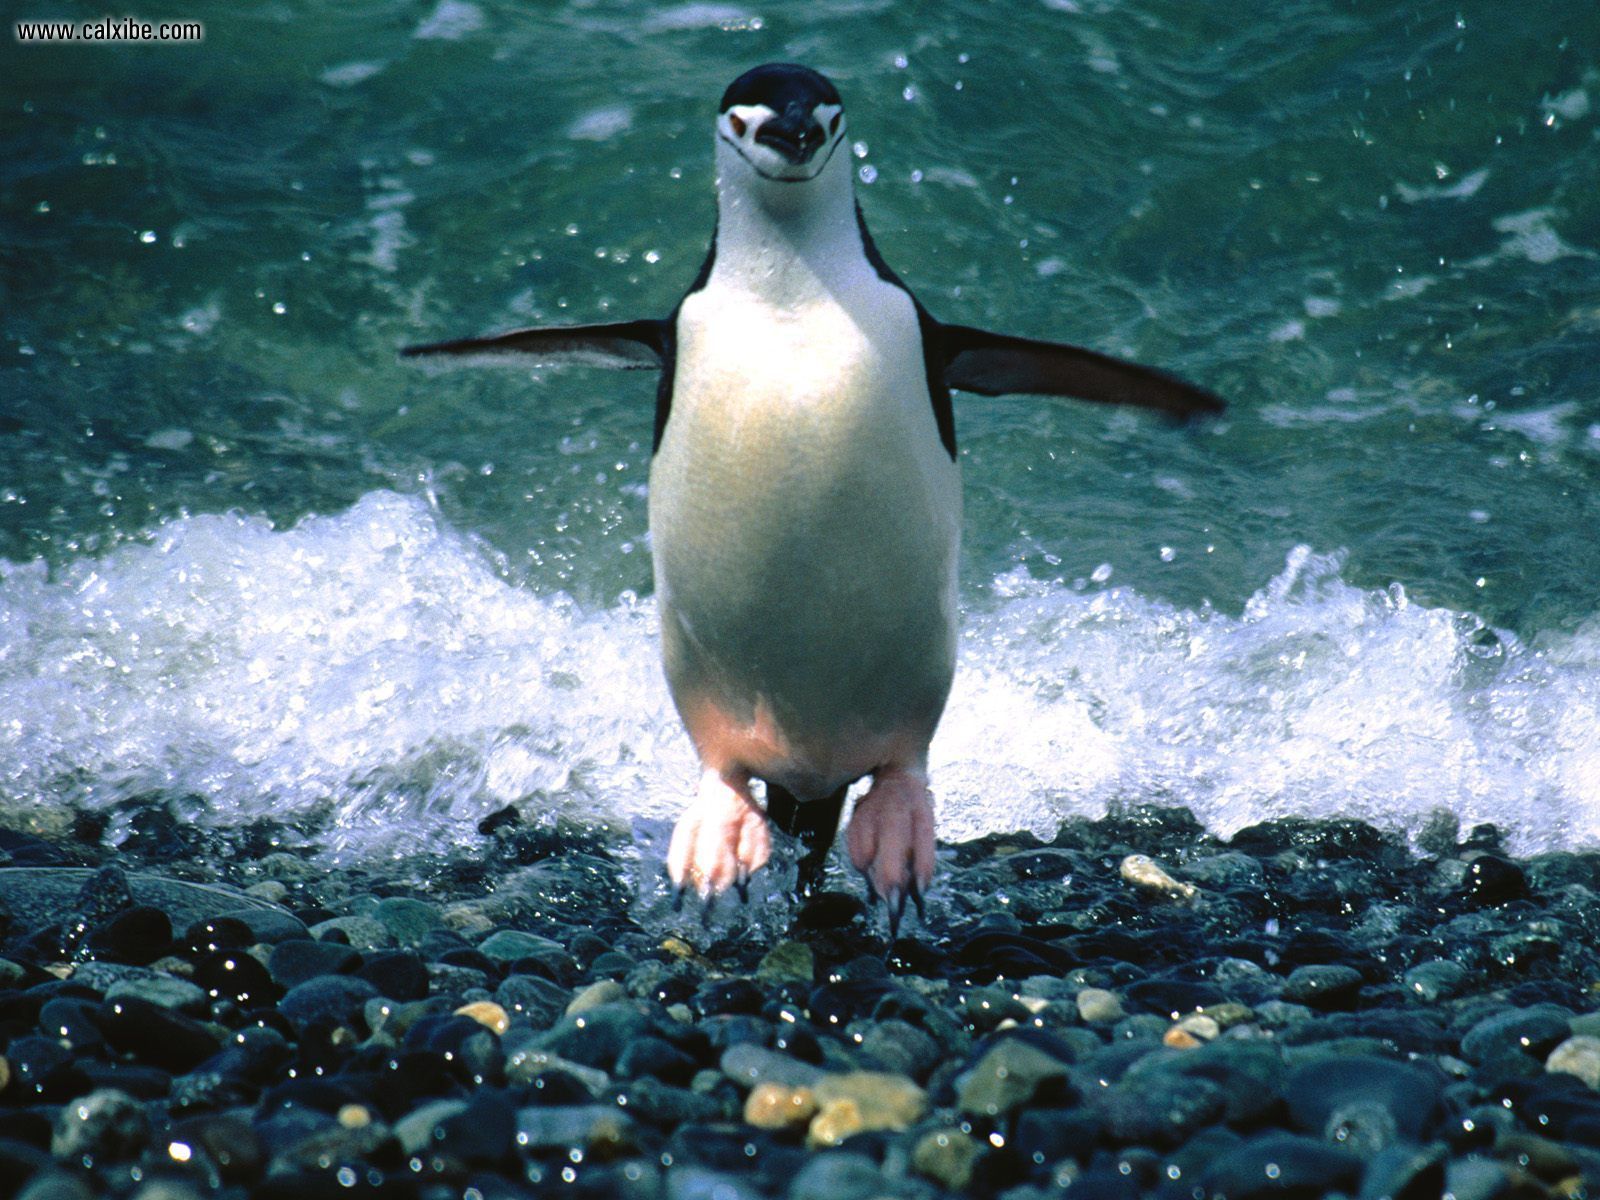 Animals: Making An Entrance Chinstrap Penguin, picture nr. 15240